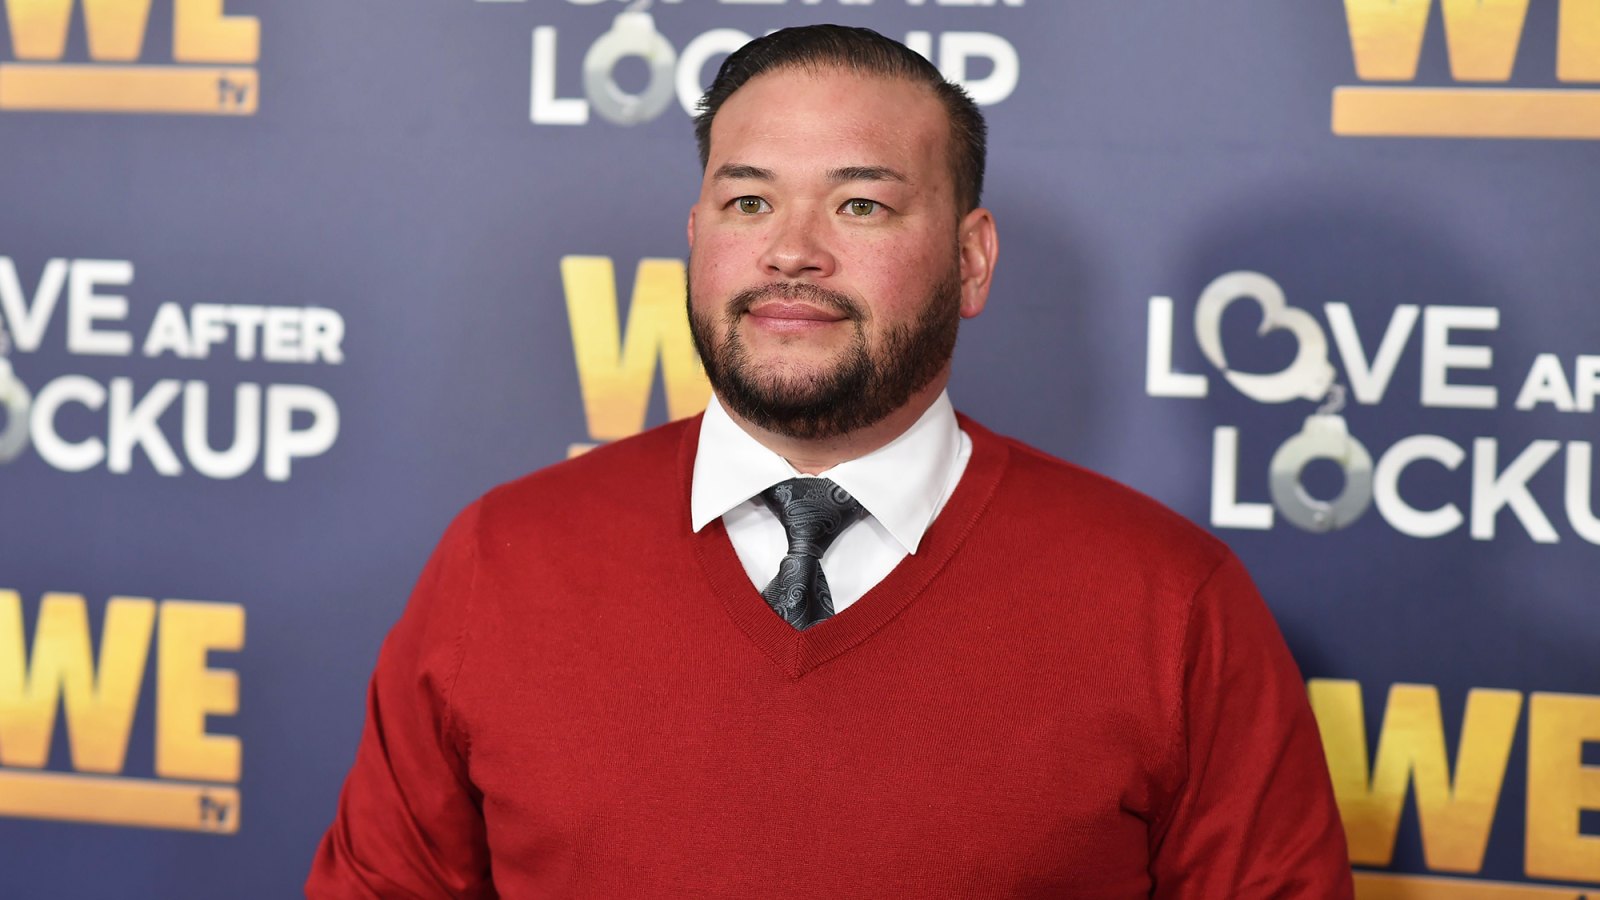 Jon Gosselin Recalls ‘Volatile’ Visit With His Kids: ‘It Was Just Not a Good Time’